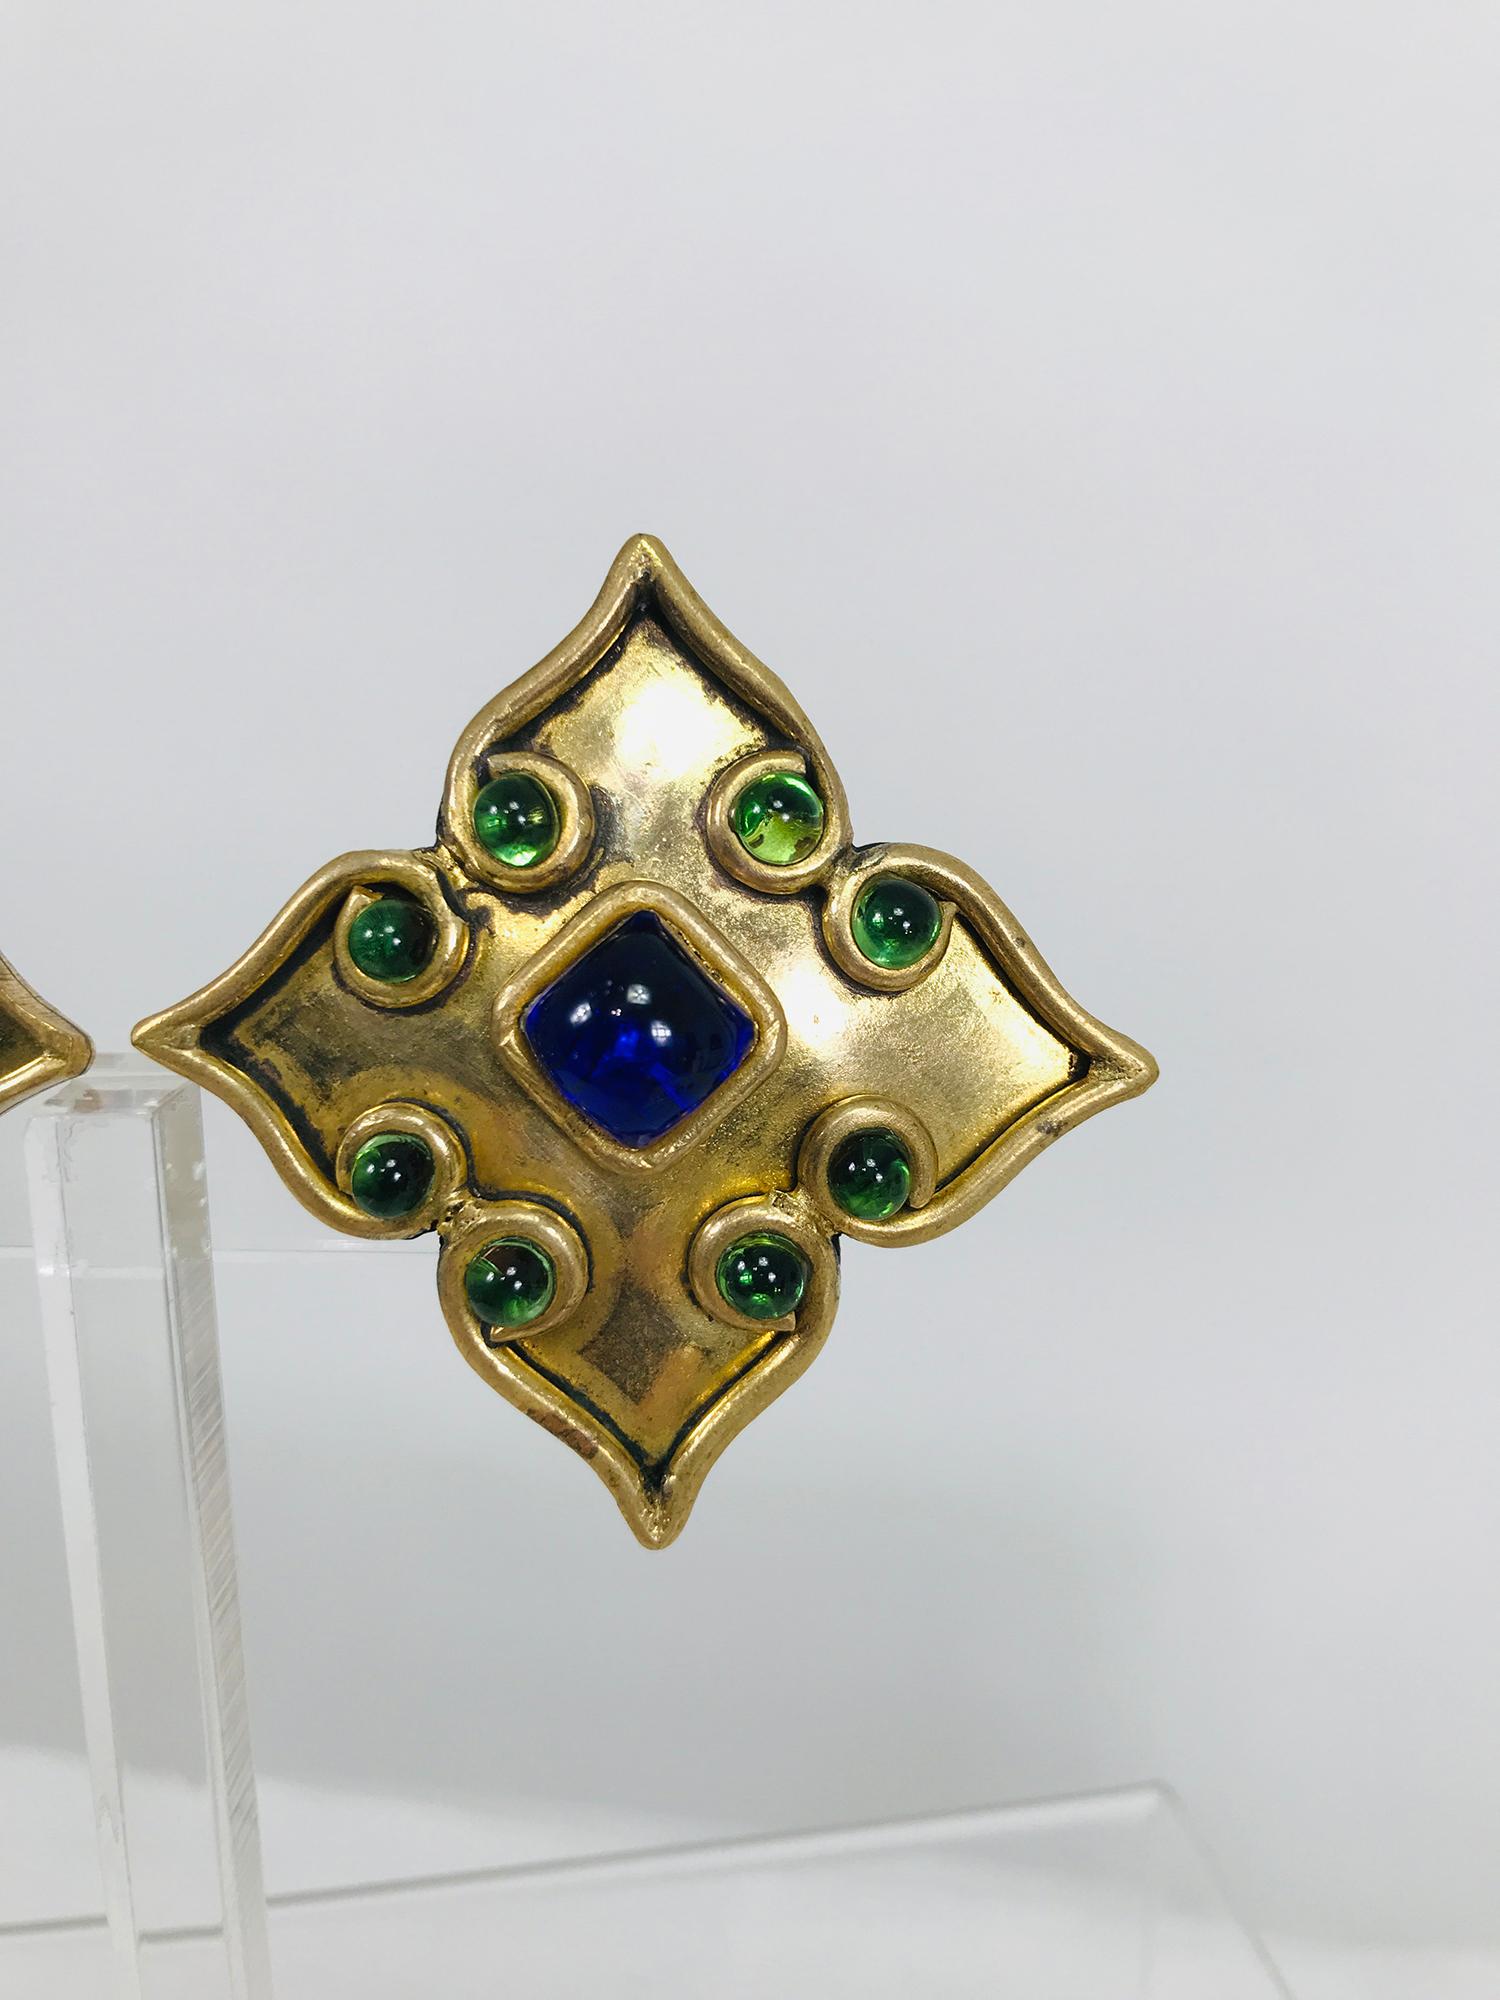 Vintage Isabel Canovas handmade goldtone Moorish jewel earrings from the 1990s. Beautiful earrings in a star shape with raised work and bezel set cabochon coloured glass stones the small stones are green and the center stone is blue. Clip back.